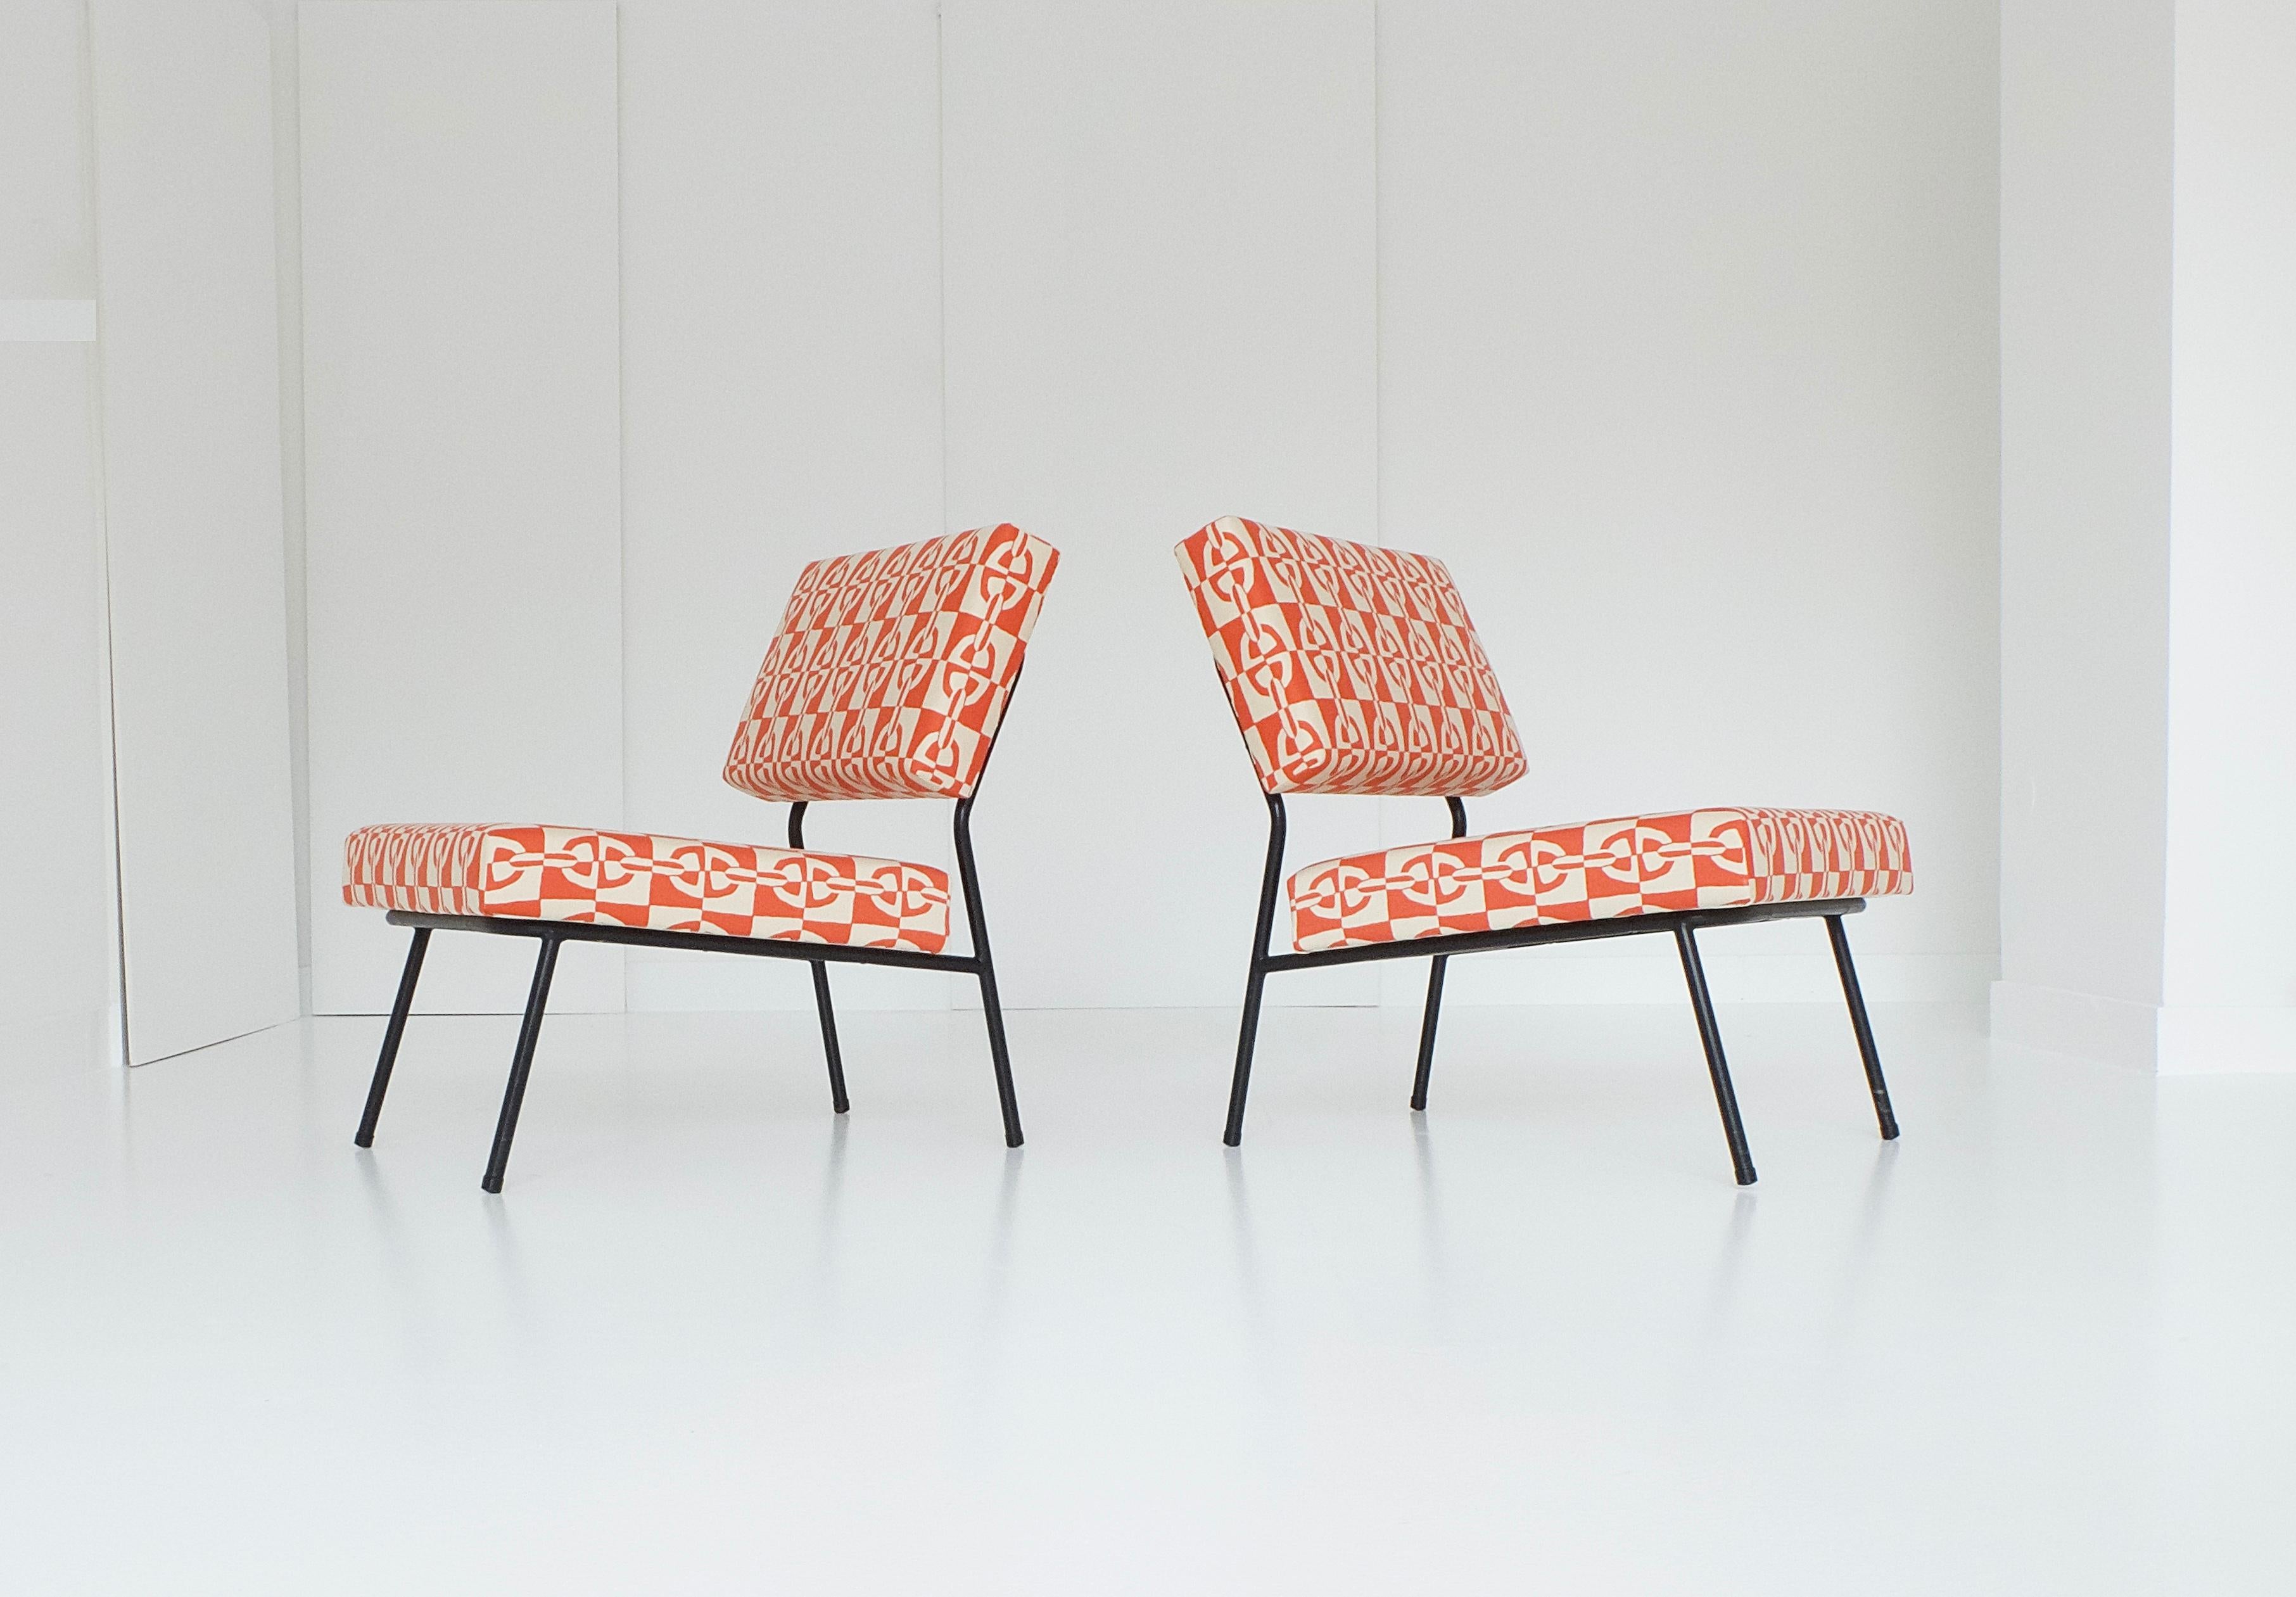 20th Century Pair of Easy Chairs by Paul Geoffroy for Airborne, with Hermès Fabrics, 1950s